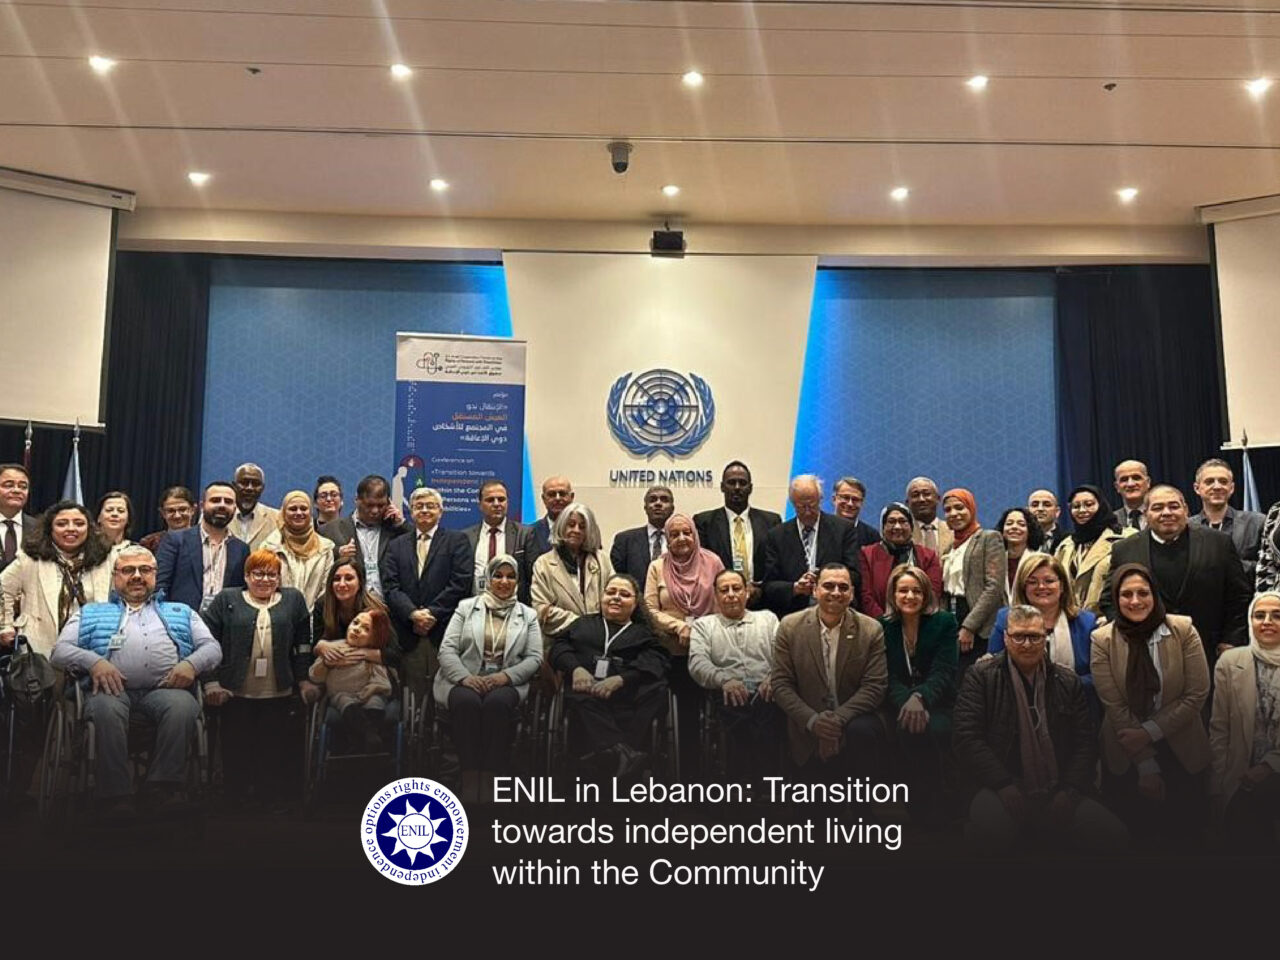 ENIL in Lebanon: Transition towards independent living within the Community